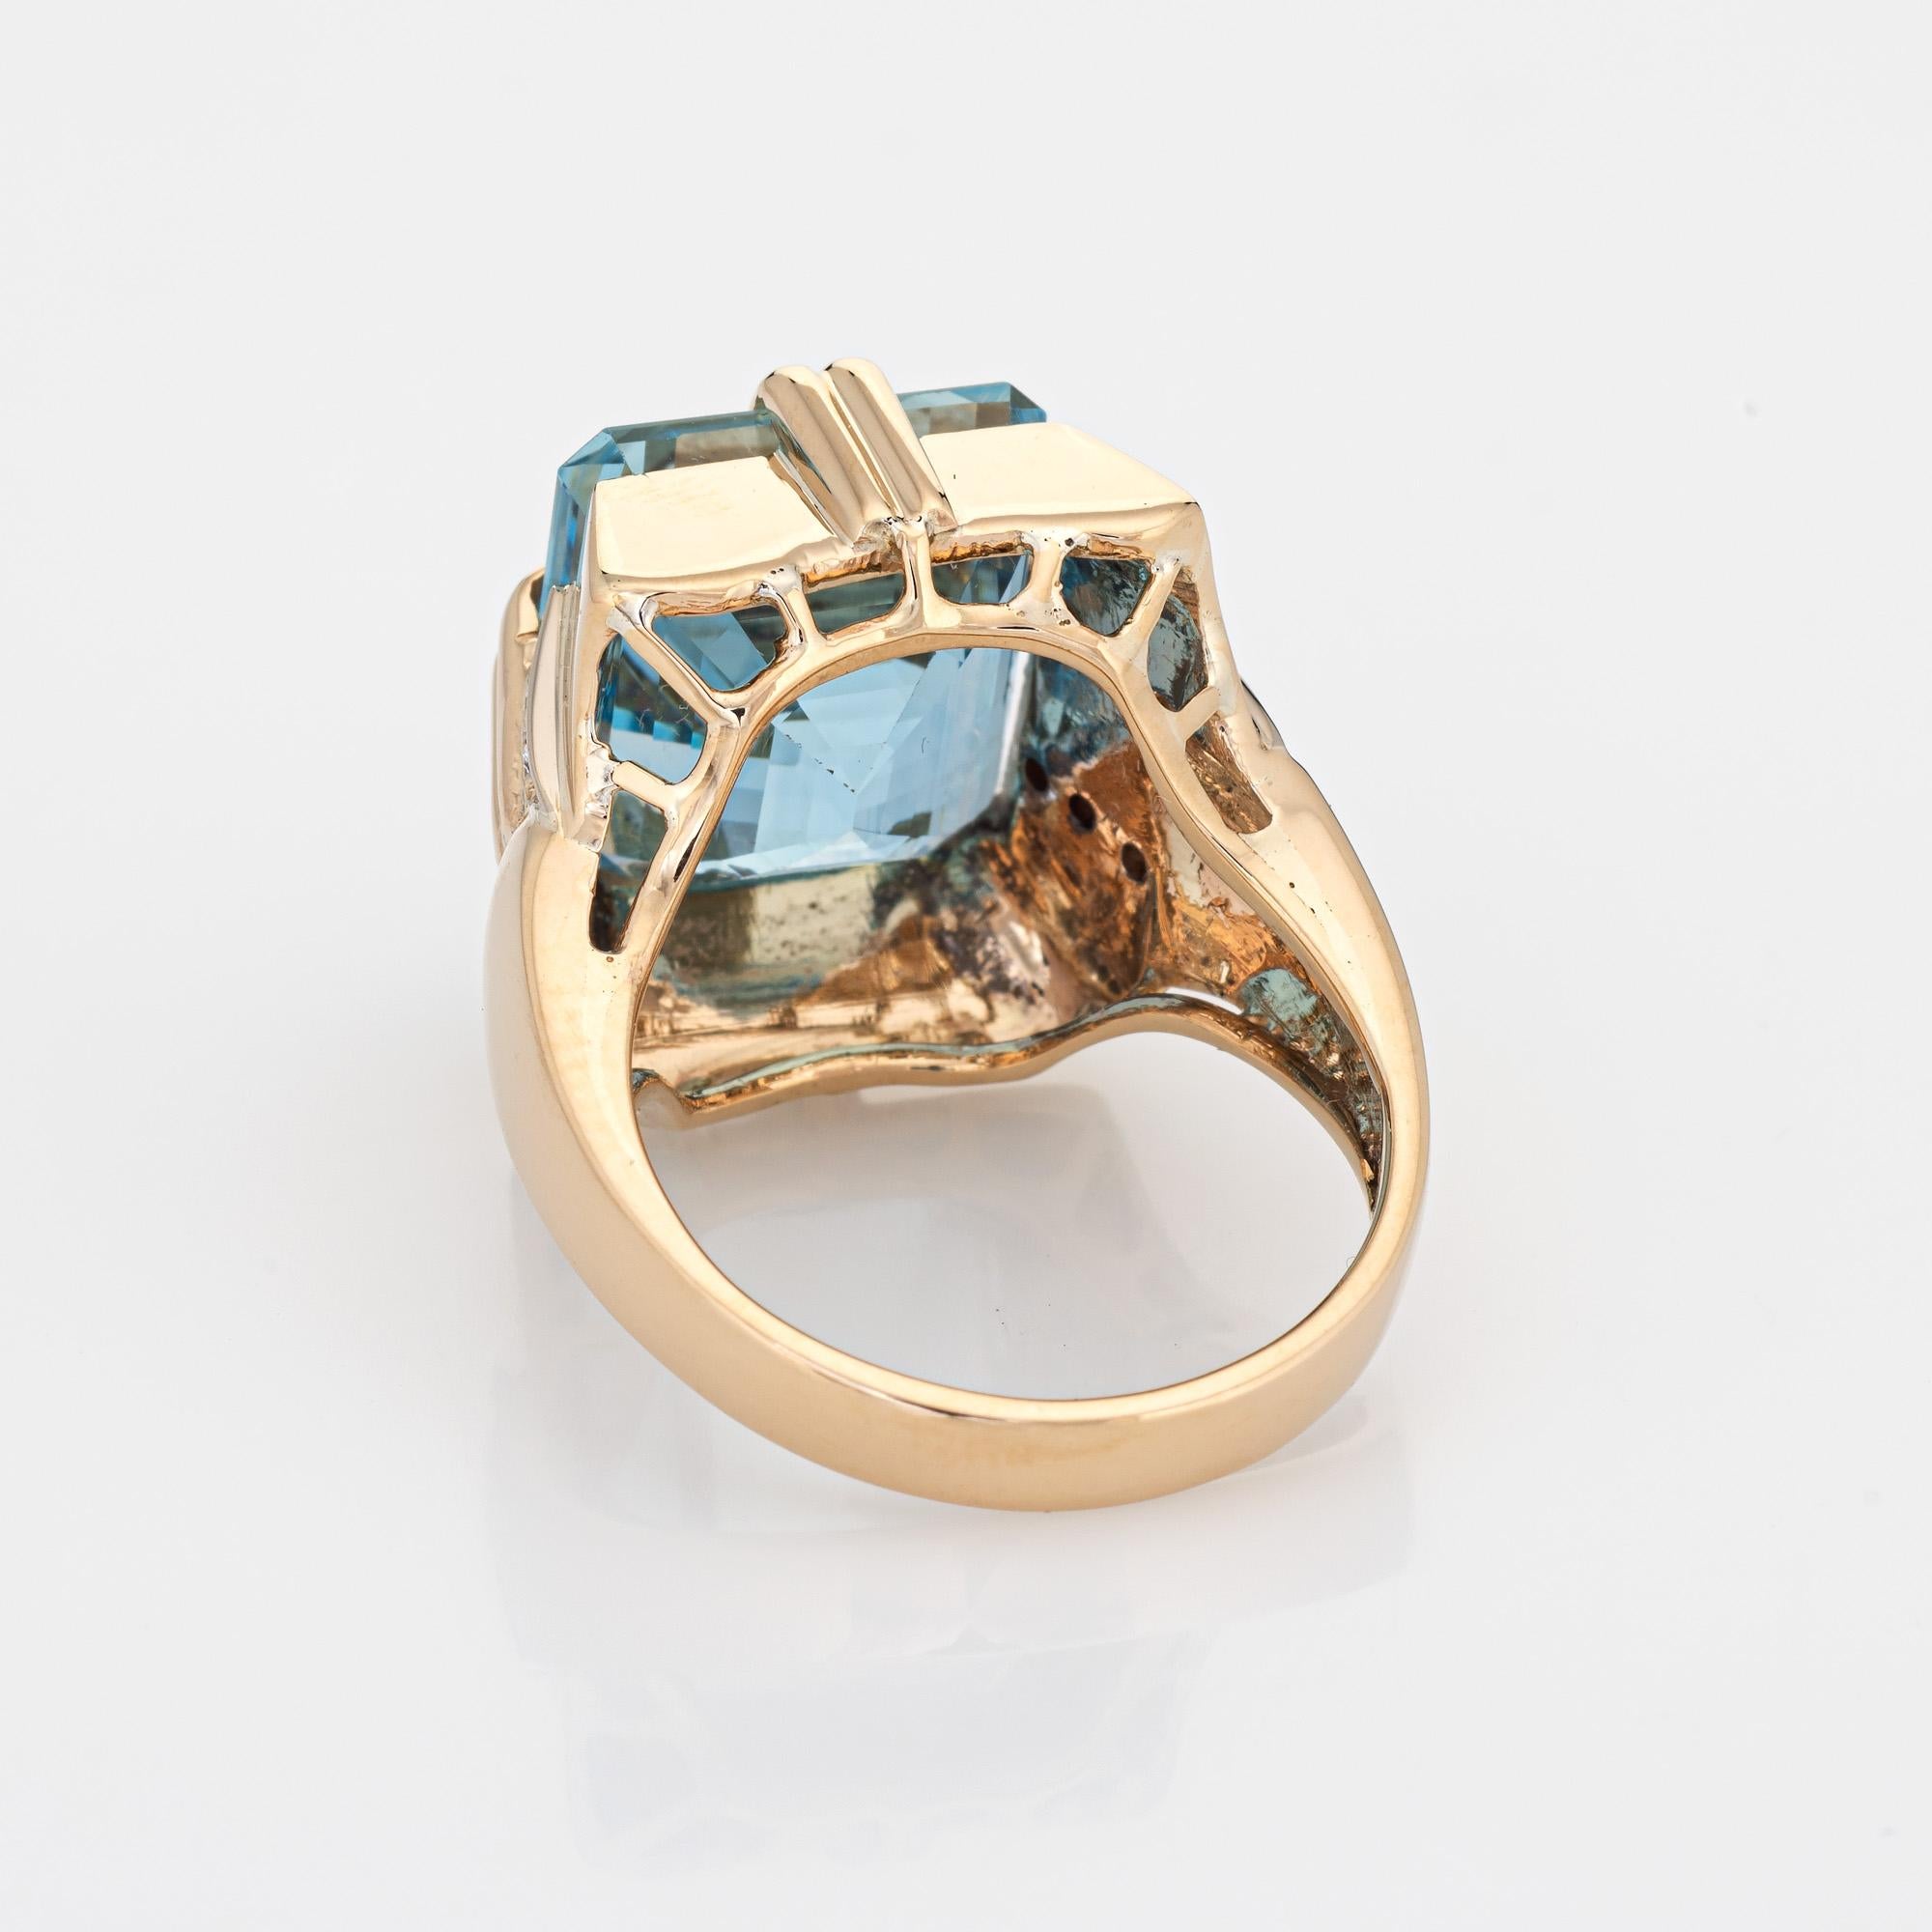 Modern 11ct Aquamarine Ring Vintage 14k Yellow Gold Square Cocktail Fine Jewelry For Sale